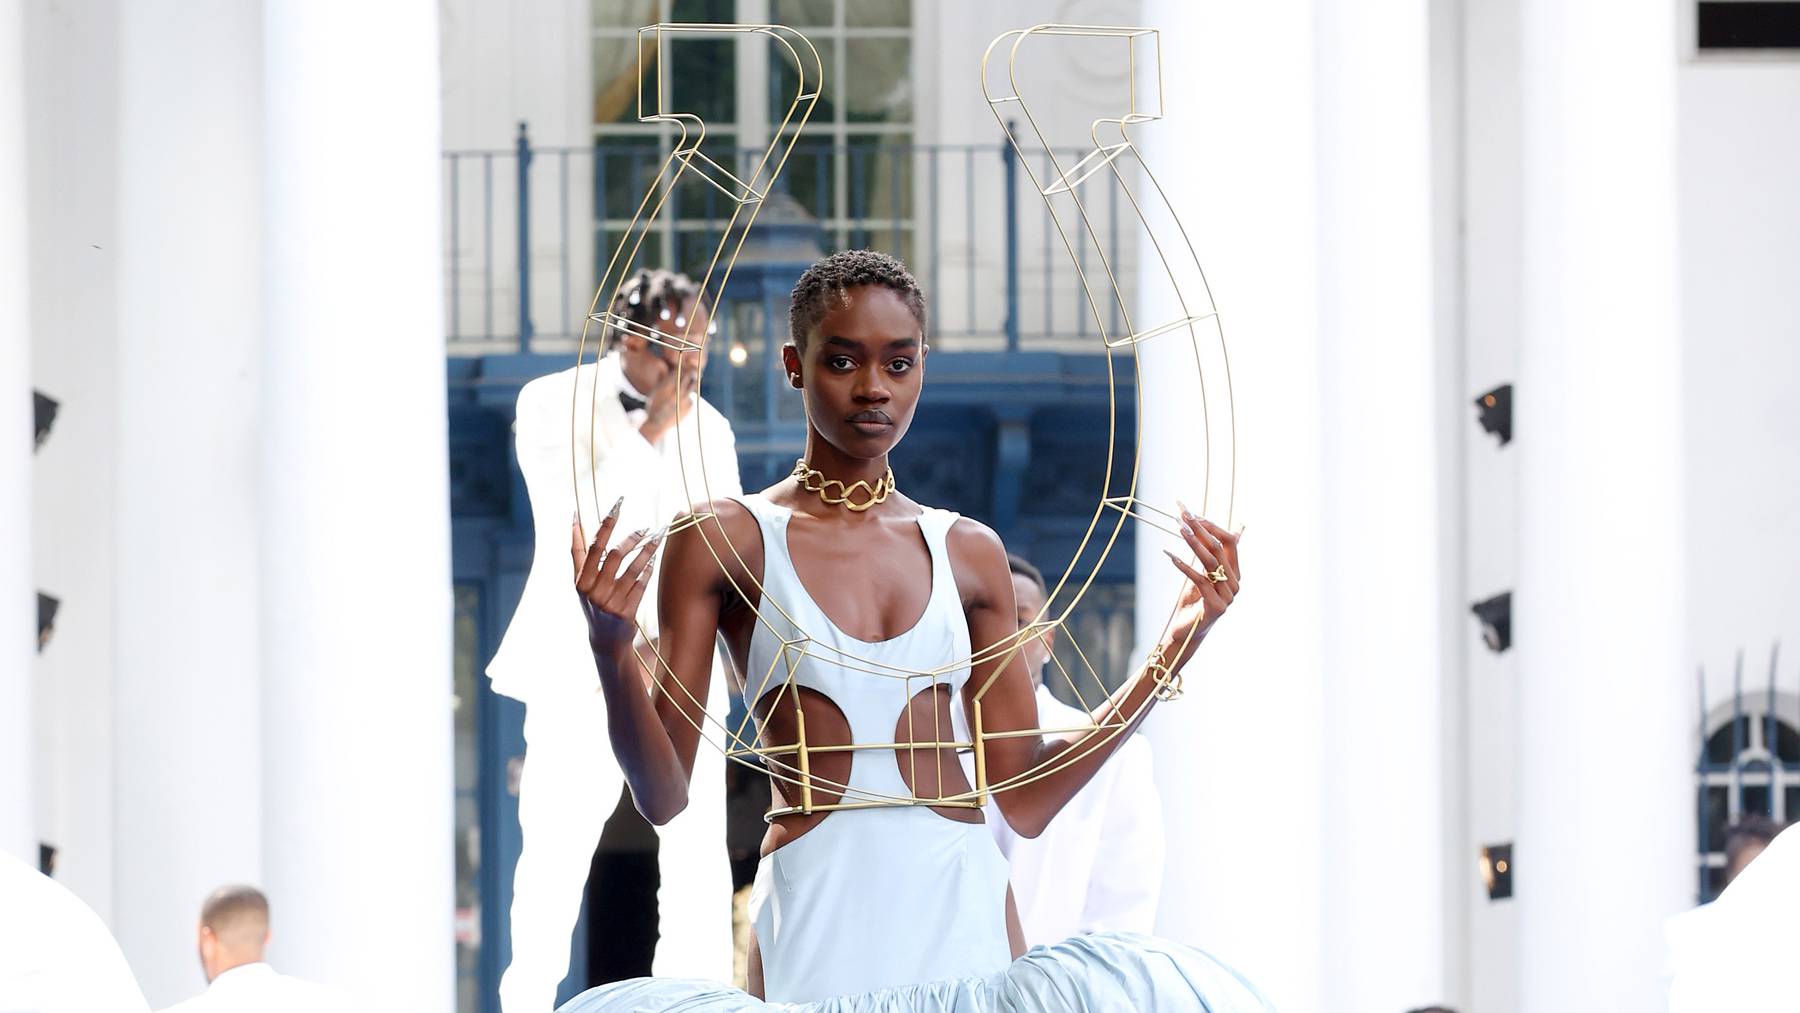 Pyer Moss Haute Couture debut on Saturday. Getty Images.